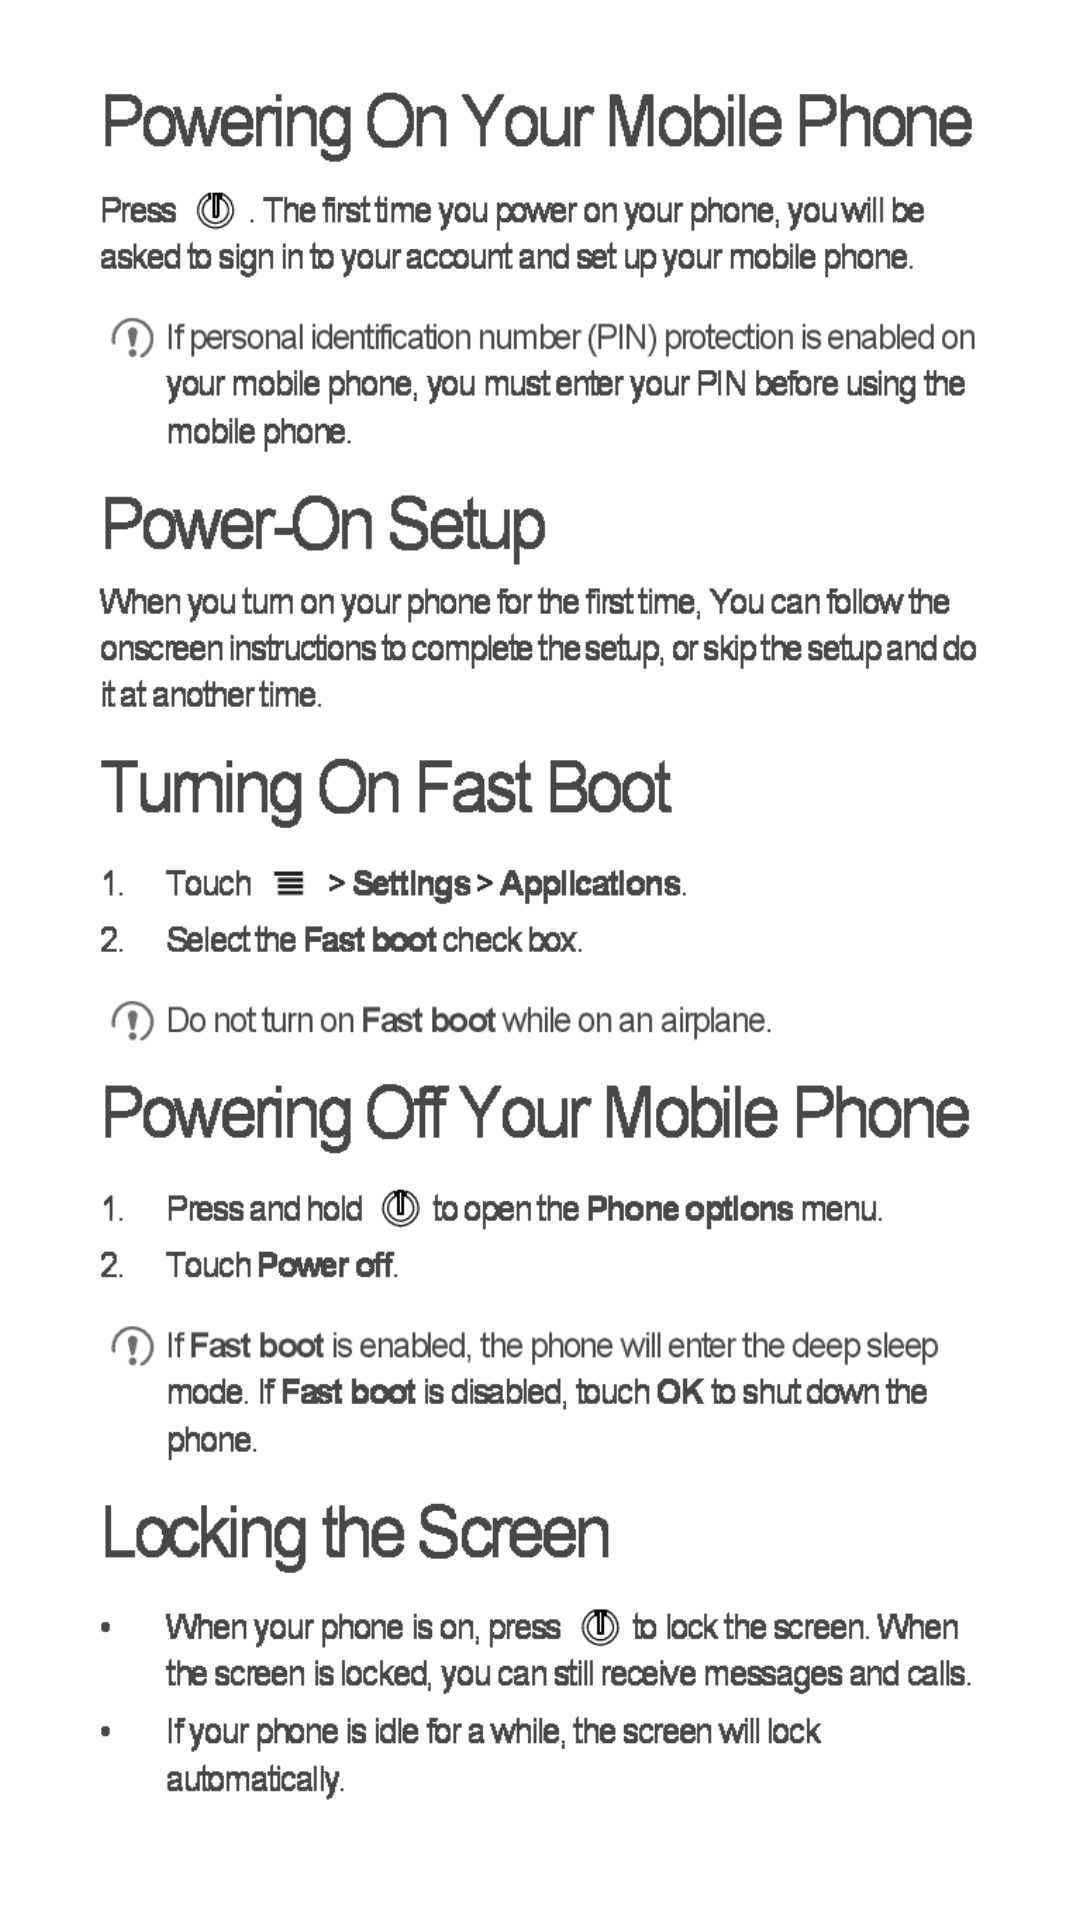 Huawei U8655-1 Power-On Setup, Turning On Fast Boot, Locking the Screen, Touch Settings Applications, Touch Power off 